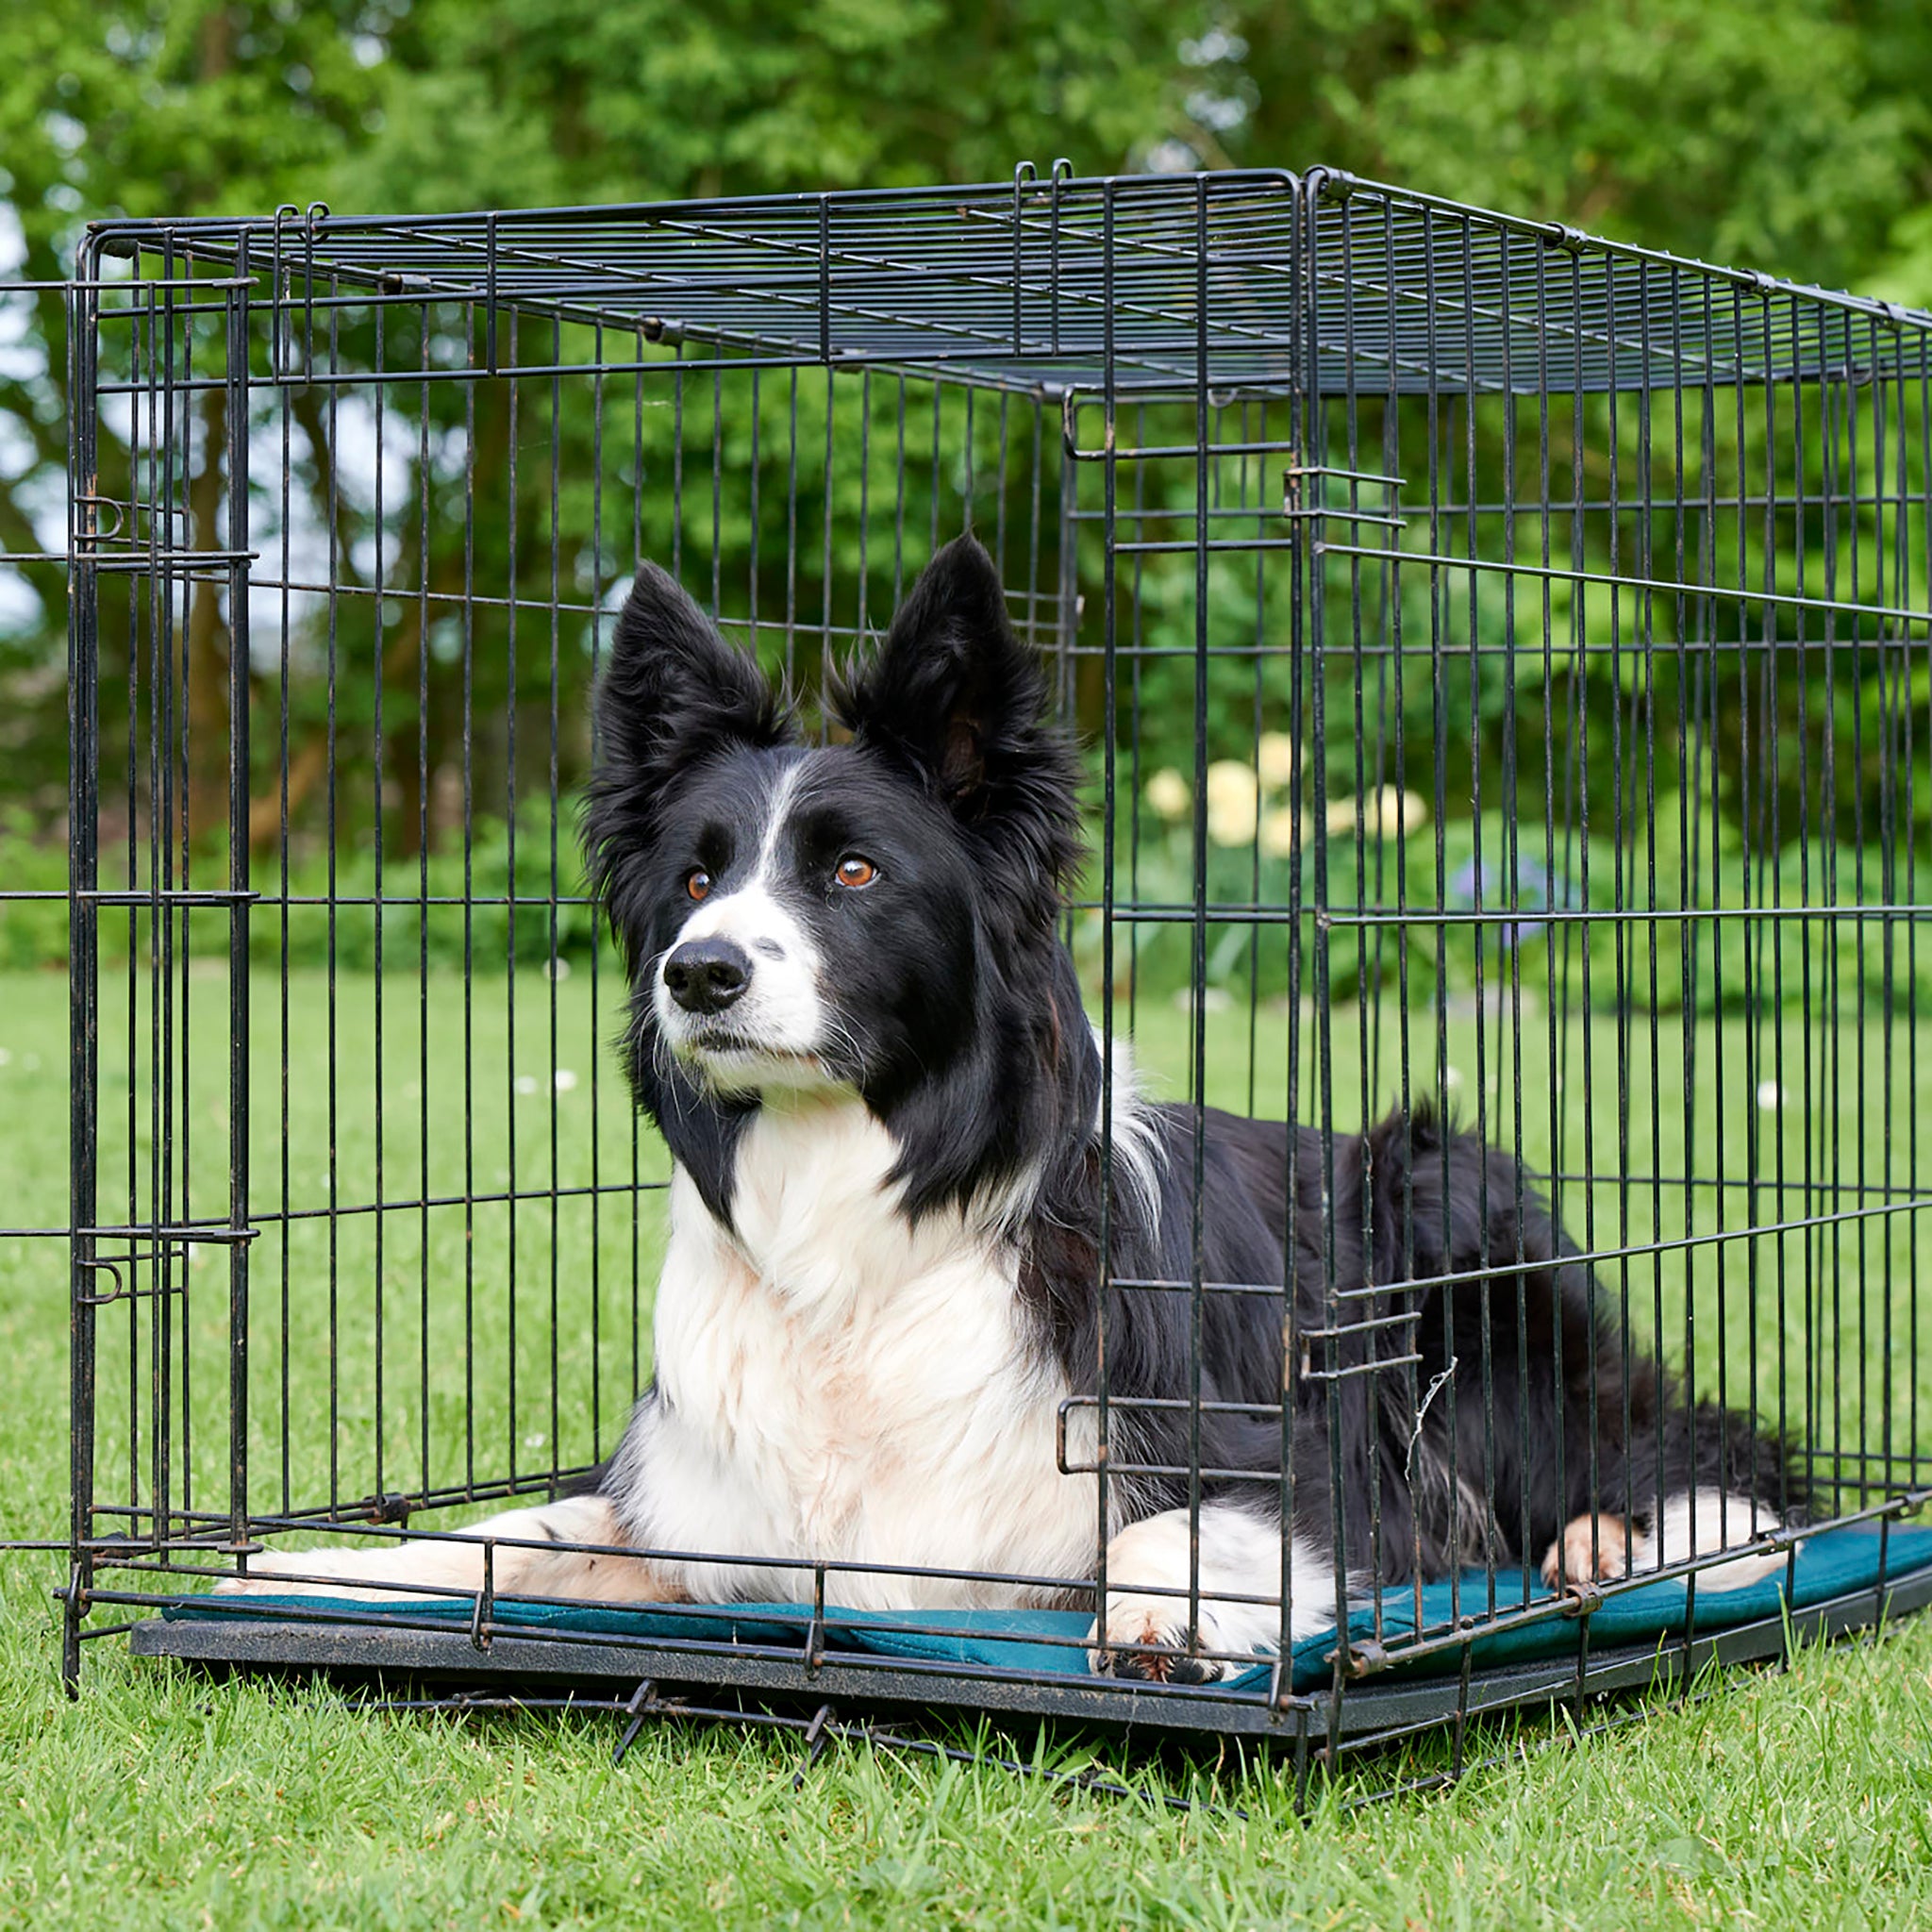 A black metal crate, with a green eco-friendly crate liner inside, filled with wool. The crate is placed on the grass at an angle. Inside the crate there is a black and white long haired border collie dog! The dog is laid up, alert staring off at an angle. The crate is placed at an angle.